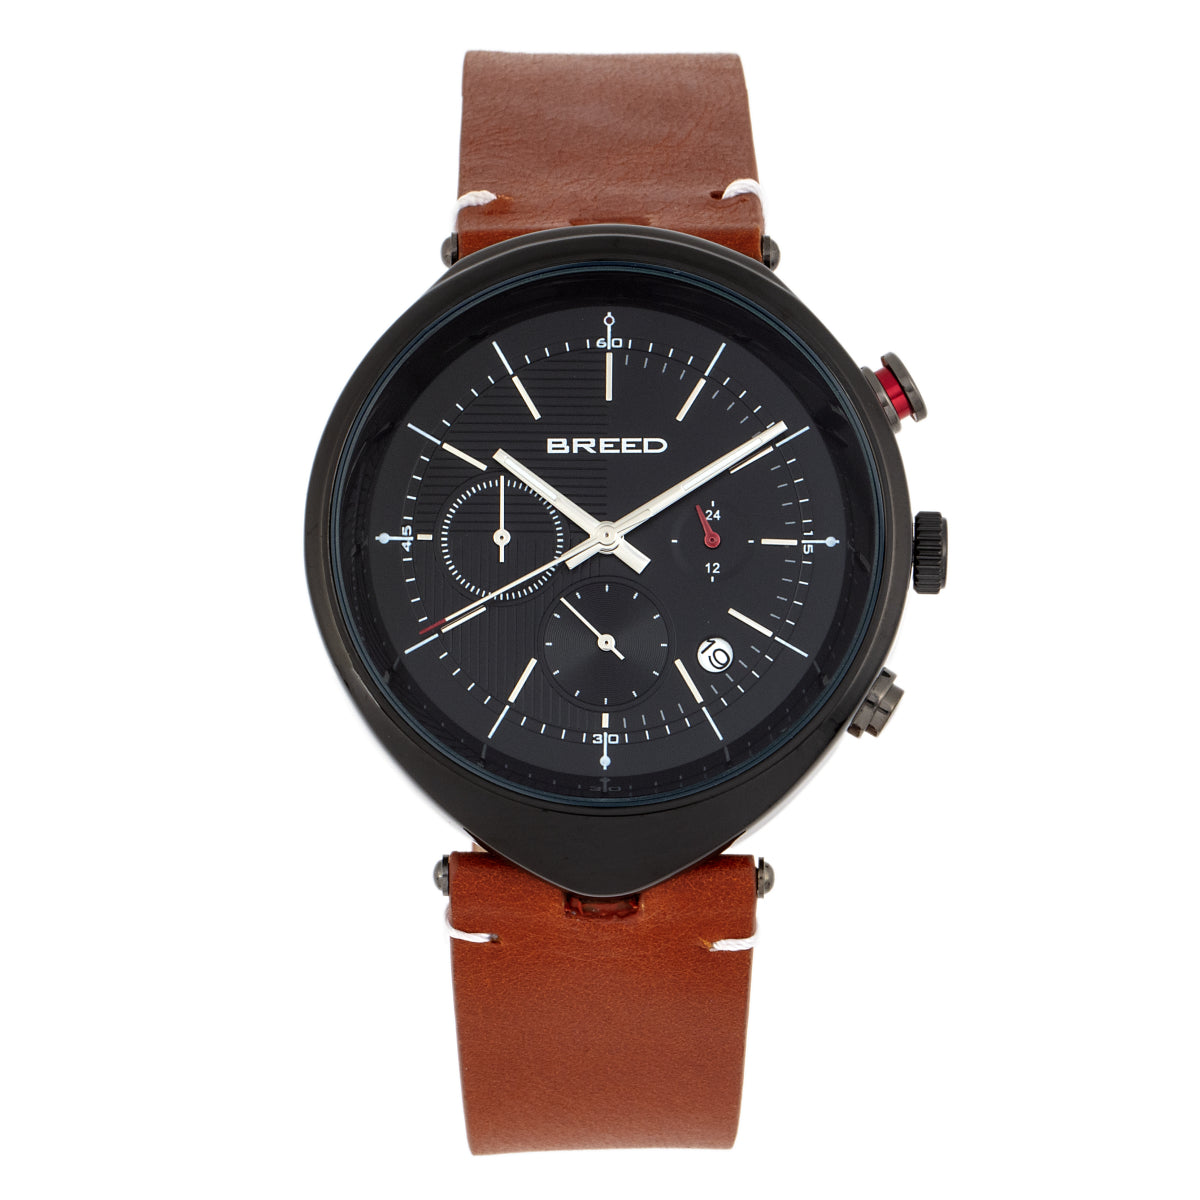 Breed Tempest Chronograph Leather-Band Watch w/Date - Brown/Black - BRD8606